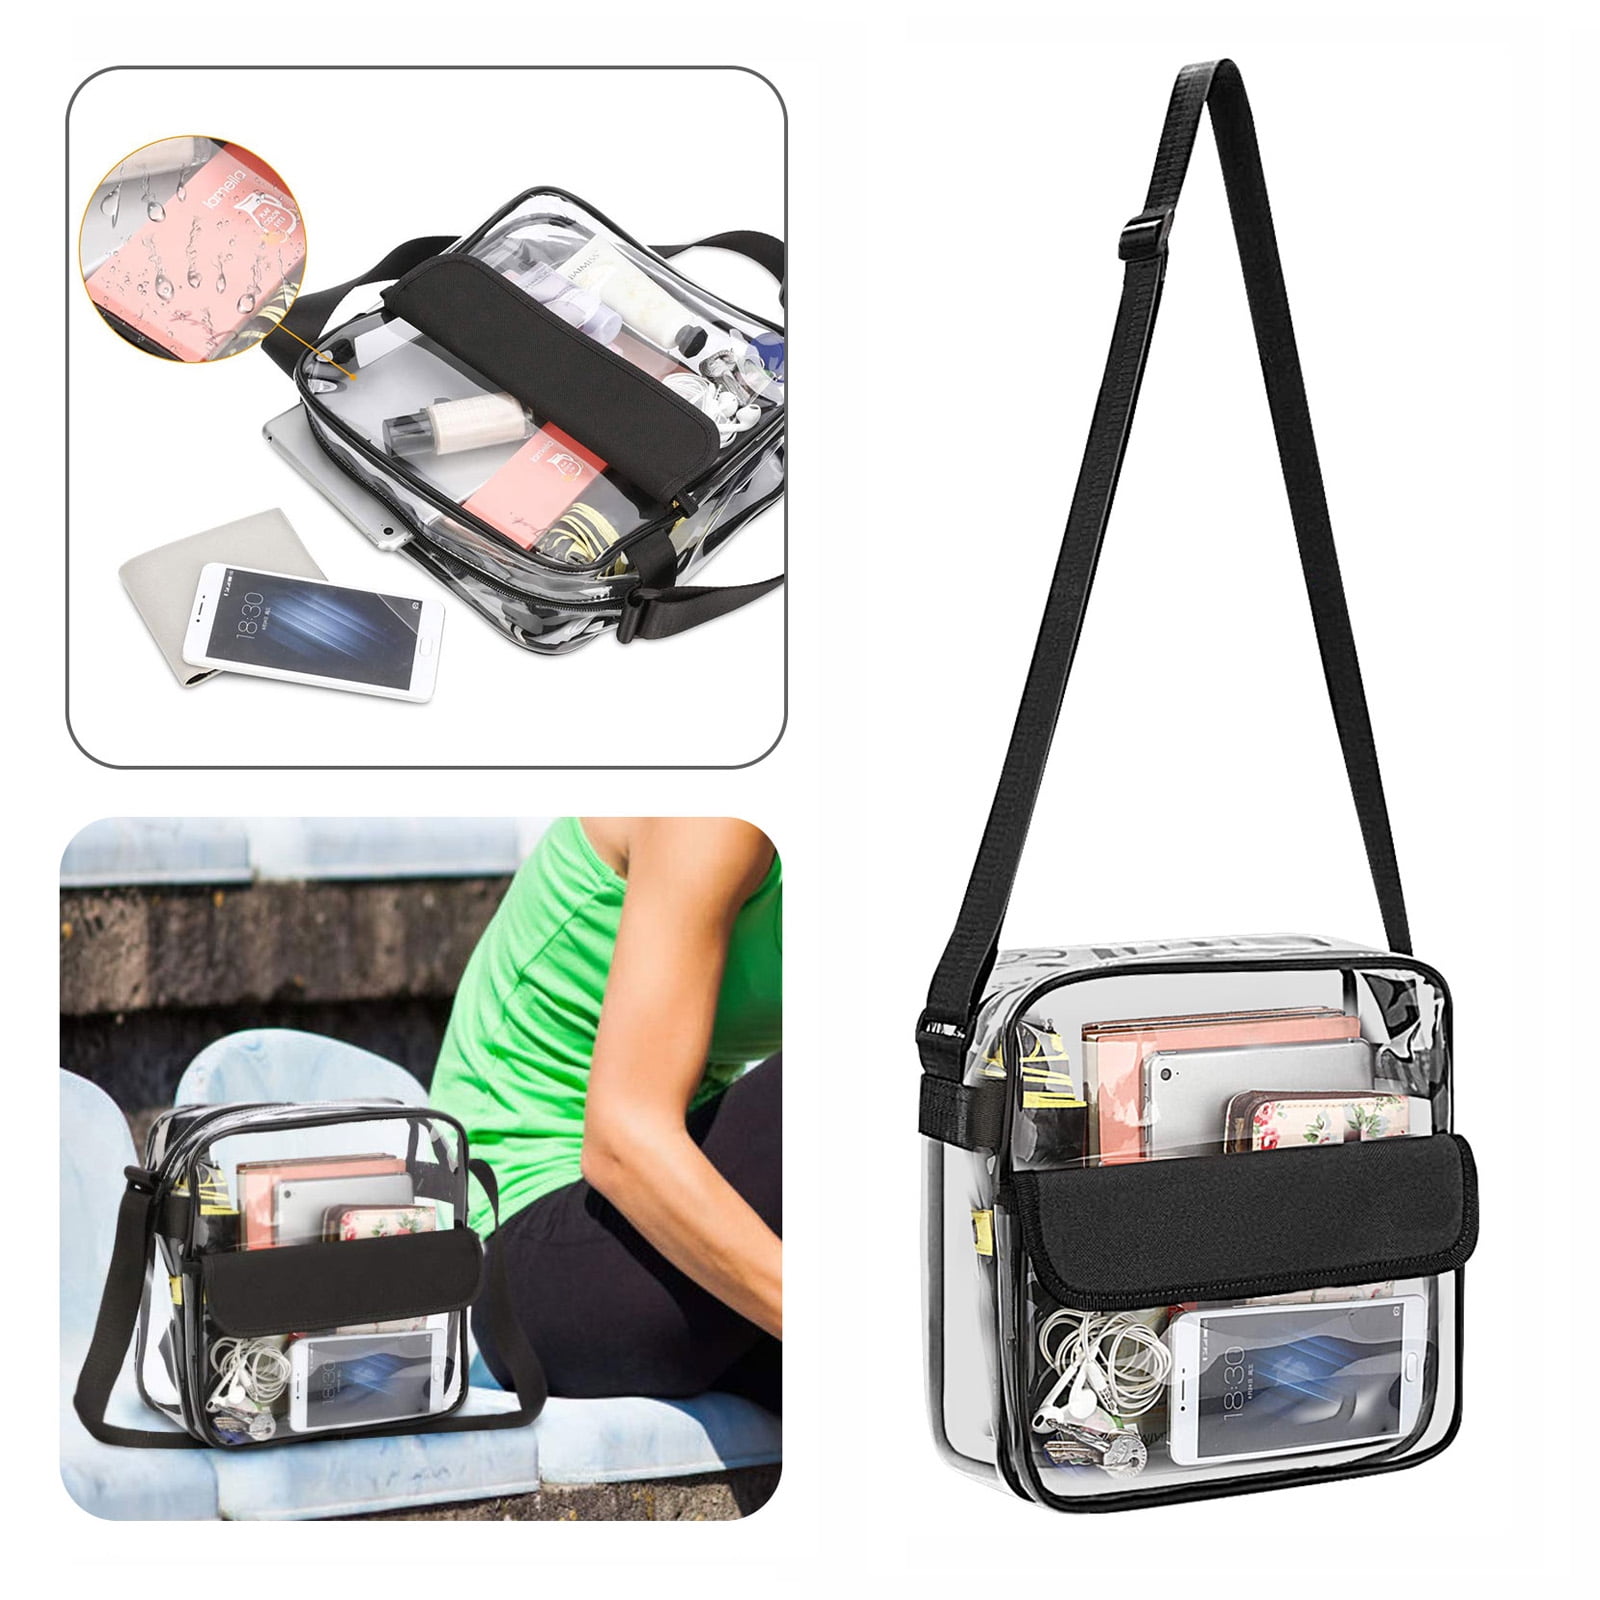 Wanty Adjustable Cross-Body Strap Clear Stadium and Security Approved Travel Large Crossbody Purse Bag with Shoulder Strap 